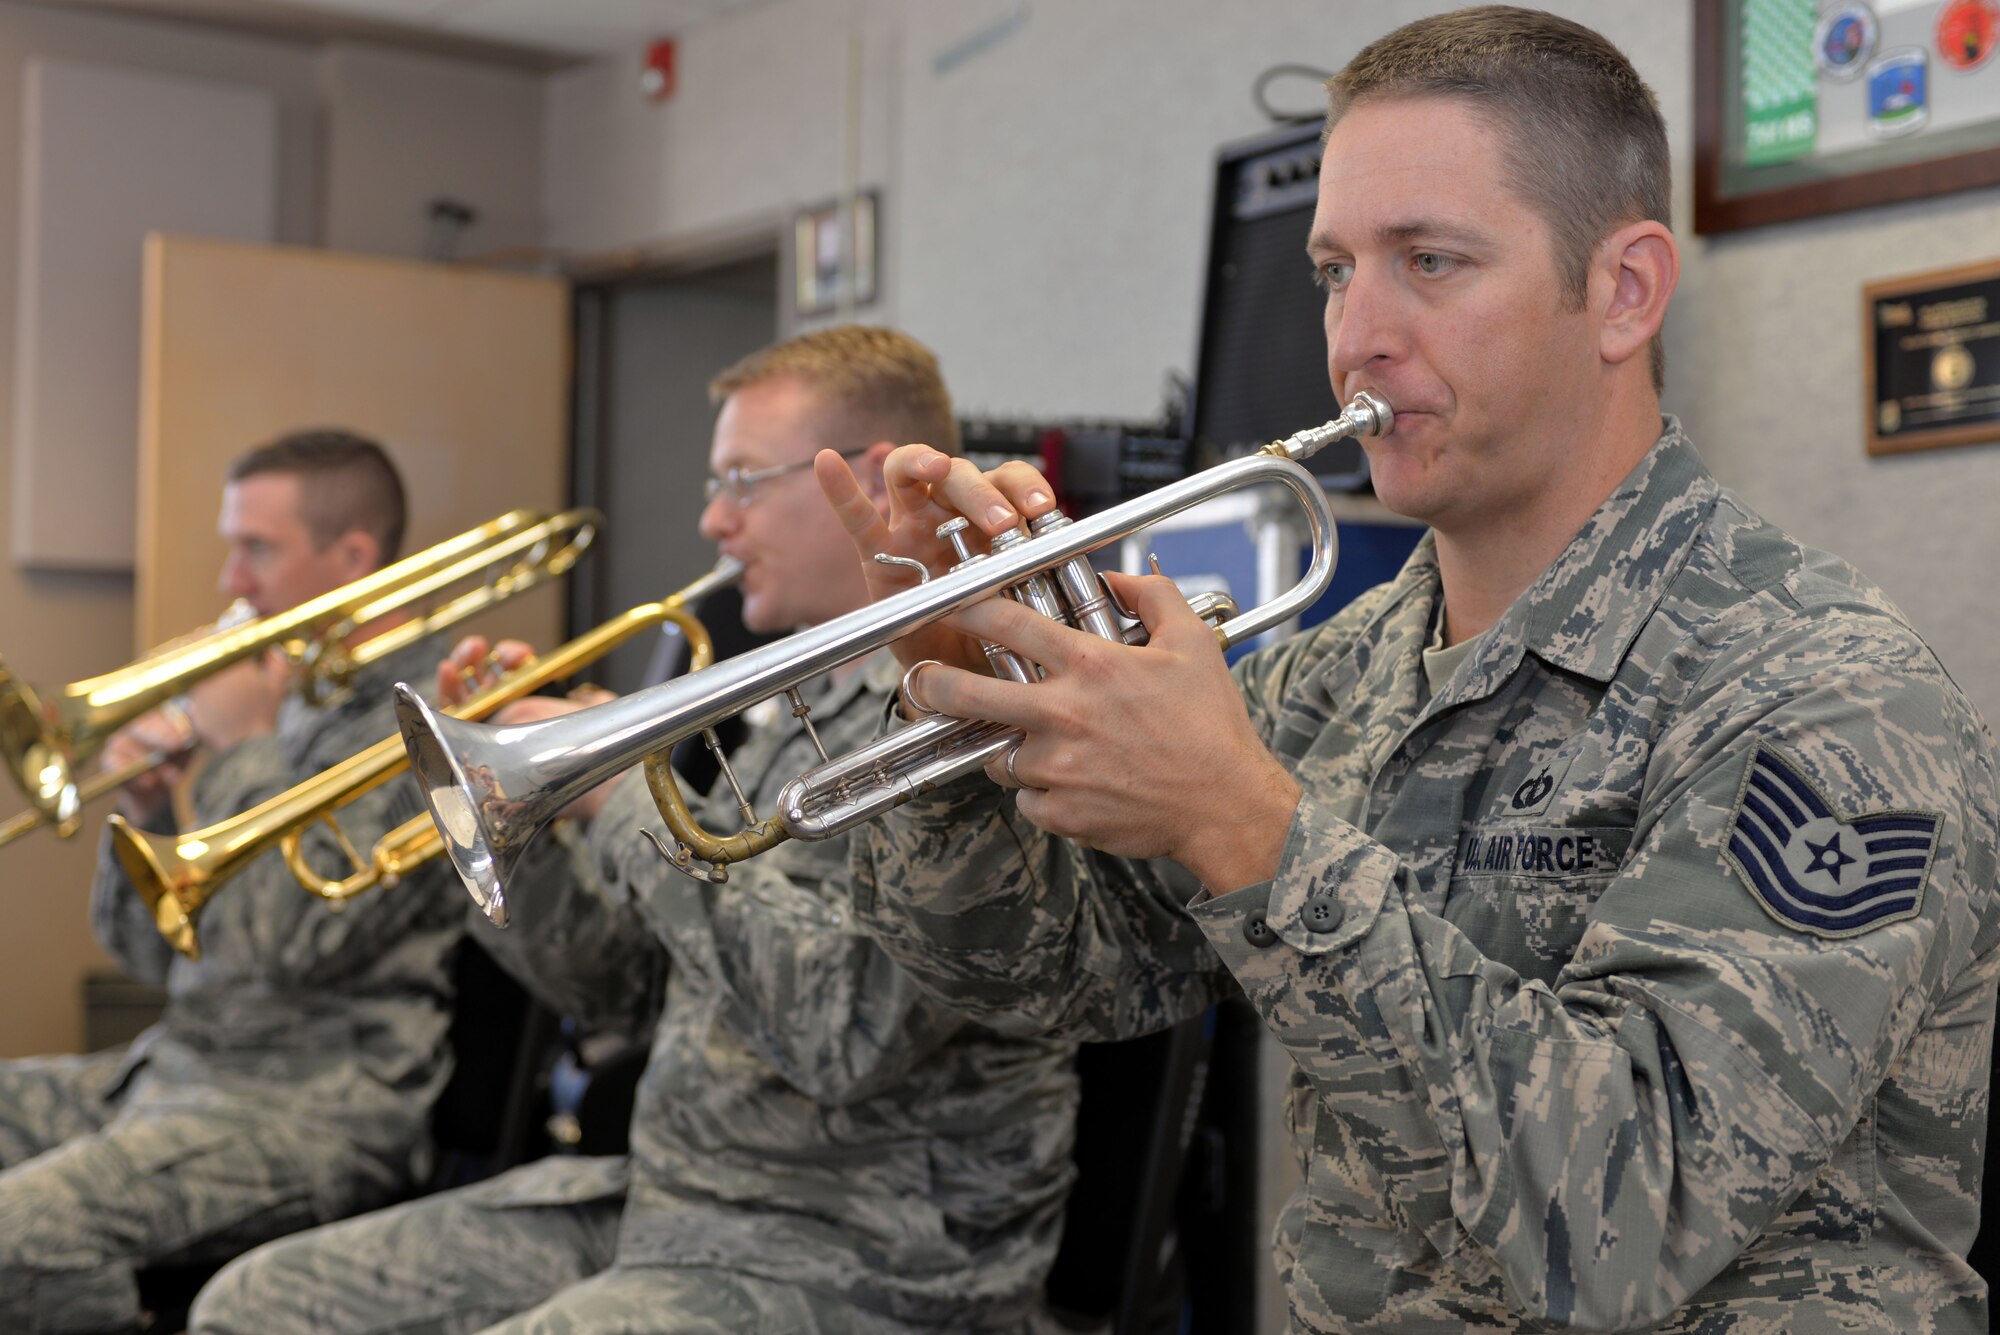 Heartland of America Band members (from right to left) Tech. Sgt. Carl Eitzen, Staff Sgt. Daniel Thrower, and Master Sgt. Ben Kadow rehearse Nov. 15, 2016 at Offutt Air Force Base in preparation for the band's upcoming holiday concert series. The 16-piece band is scheduled to conduct four free holiday-themed performances in the local community starting Dec. 10 and ending Dec. 18, 2016.The series will kick-off with a performance Dec. 10 at 2 p.m. at the Glenwood Community High School Performing Arts Center in Glenwood, Iowa and is presented in partnership with the Glenwood-Opinion Tribune and the Glenwood Community School District. The band will perform again Dec. 16 at 7:30 p.m.; Dec. 17 at 7:30 p.m. and Dec. 18 at 2 p.m. at Bellevue East High School in Bellevue, Nebraska in the school’s auditorium and is presented in partnership with Suburban Newspapers. Information on how to get tickets for these free concerts will be posted soon on the band's website (www.heartlandofamericaband.af.mil) and Facebook page (search for USAF Heartland of America Band) as well as in ads in the Omaha World-Herald, Bellevue Leader and Glenwood Opinion-Tribune newspapers.
 